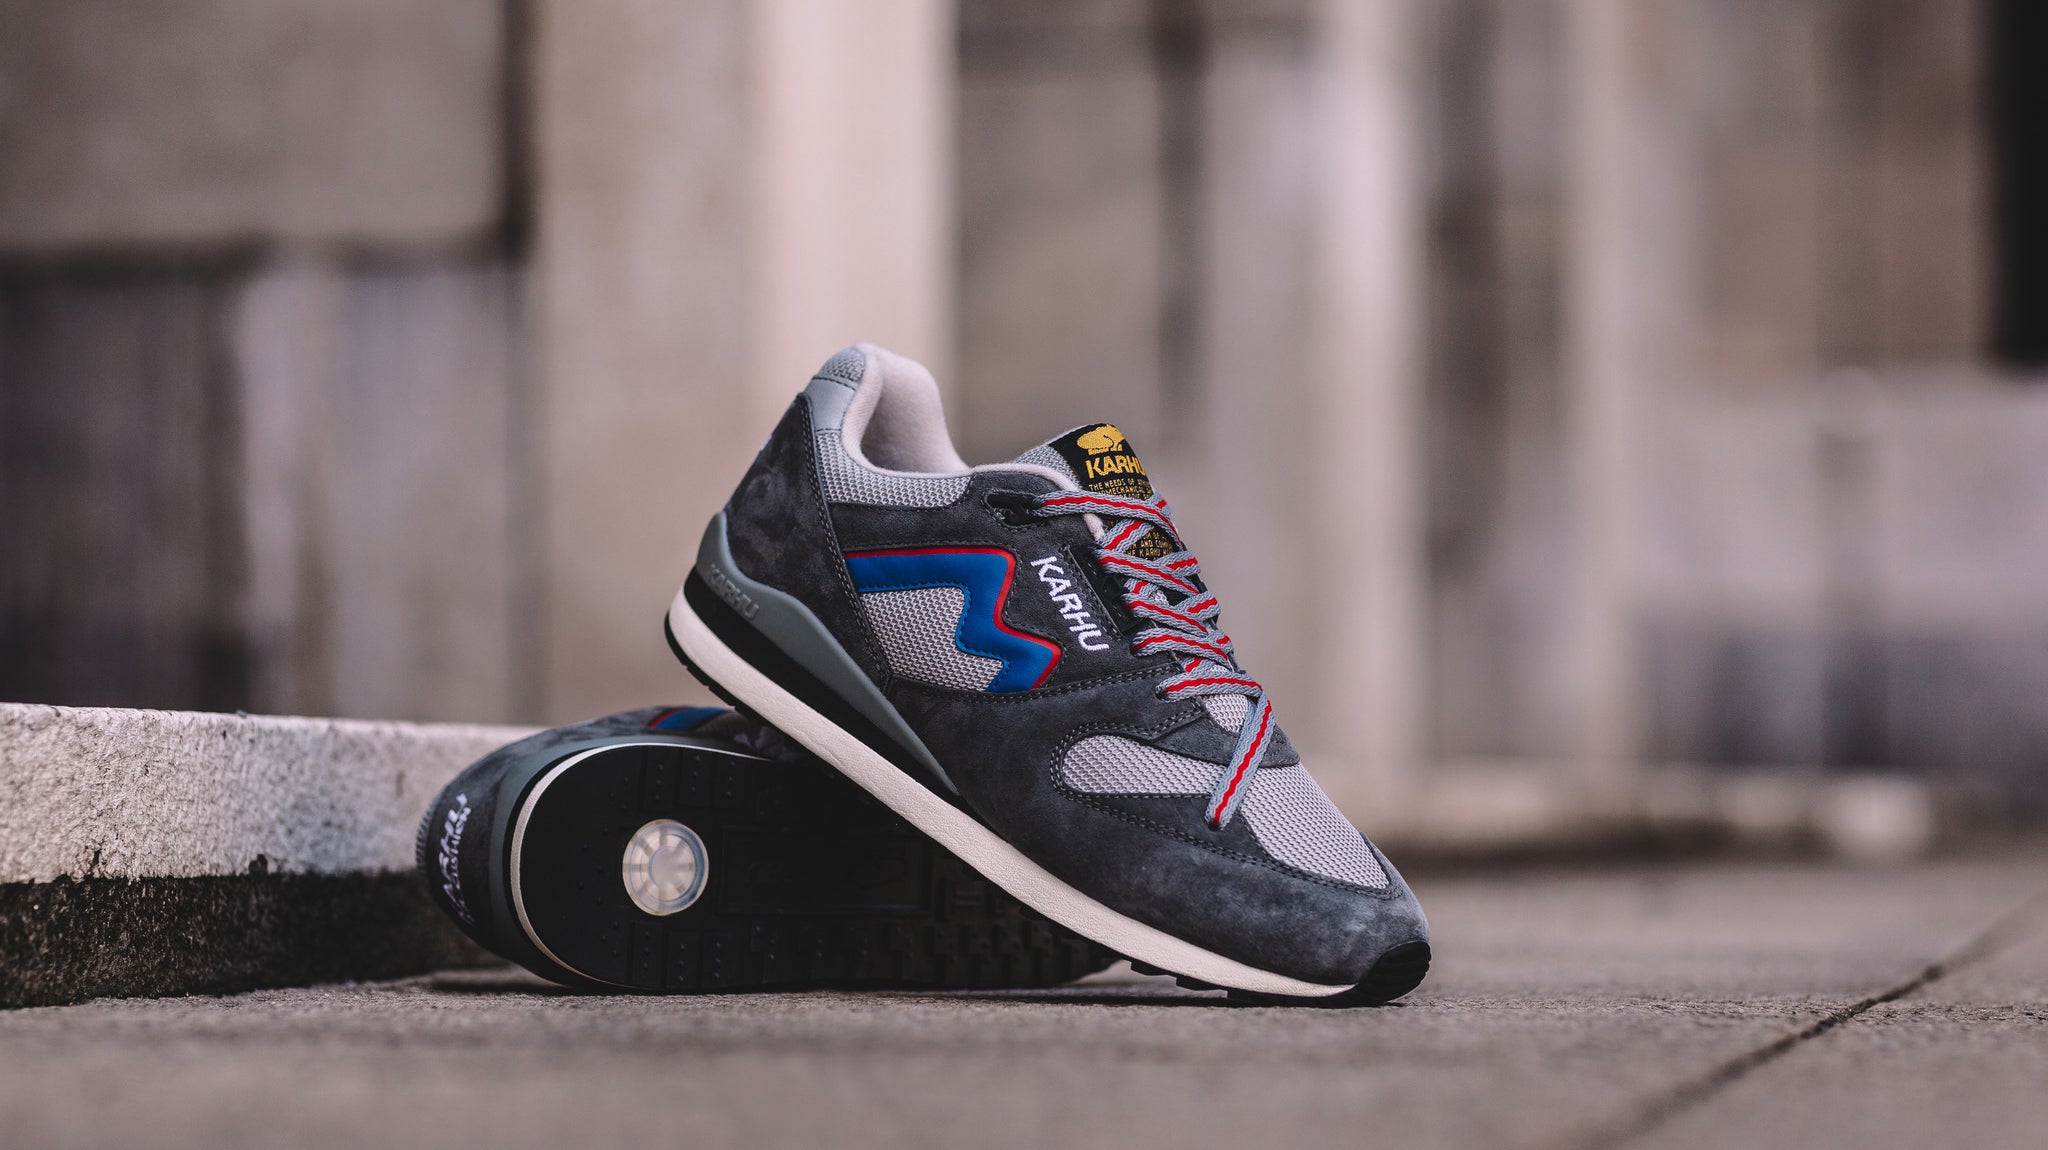 Relaunch | of Karhu’s Synchron Classic Style in its Original Colors